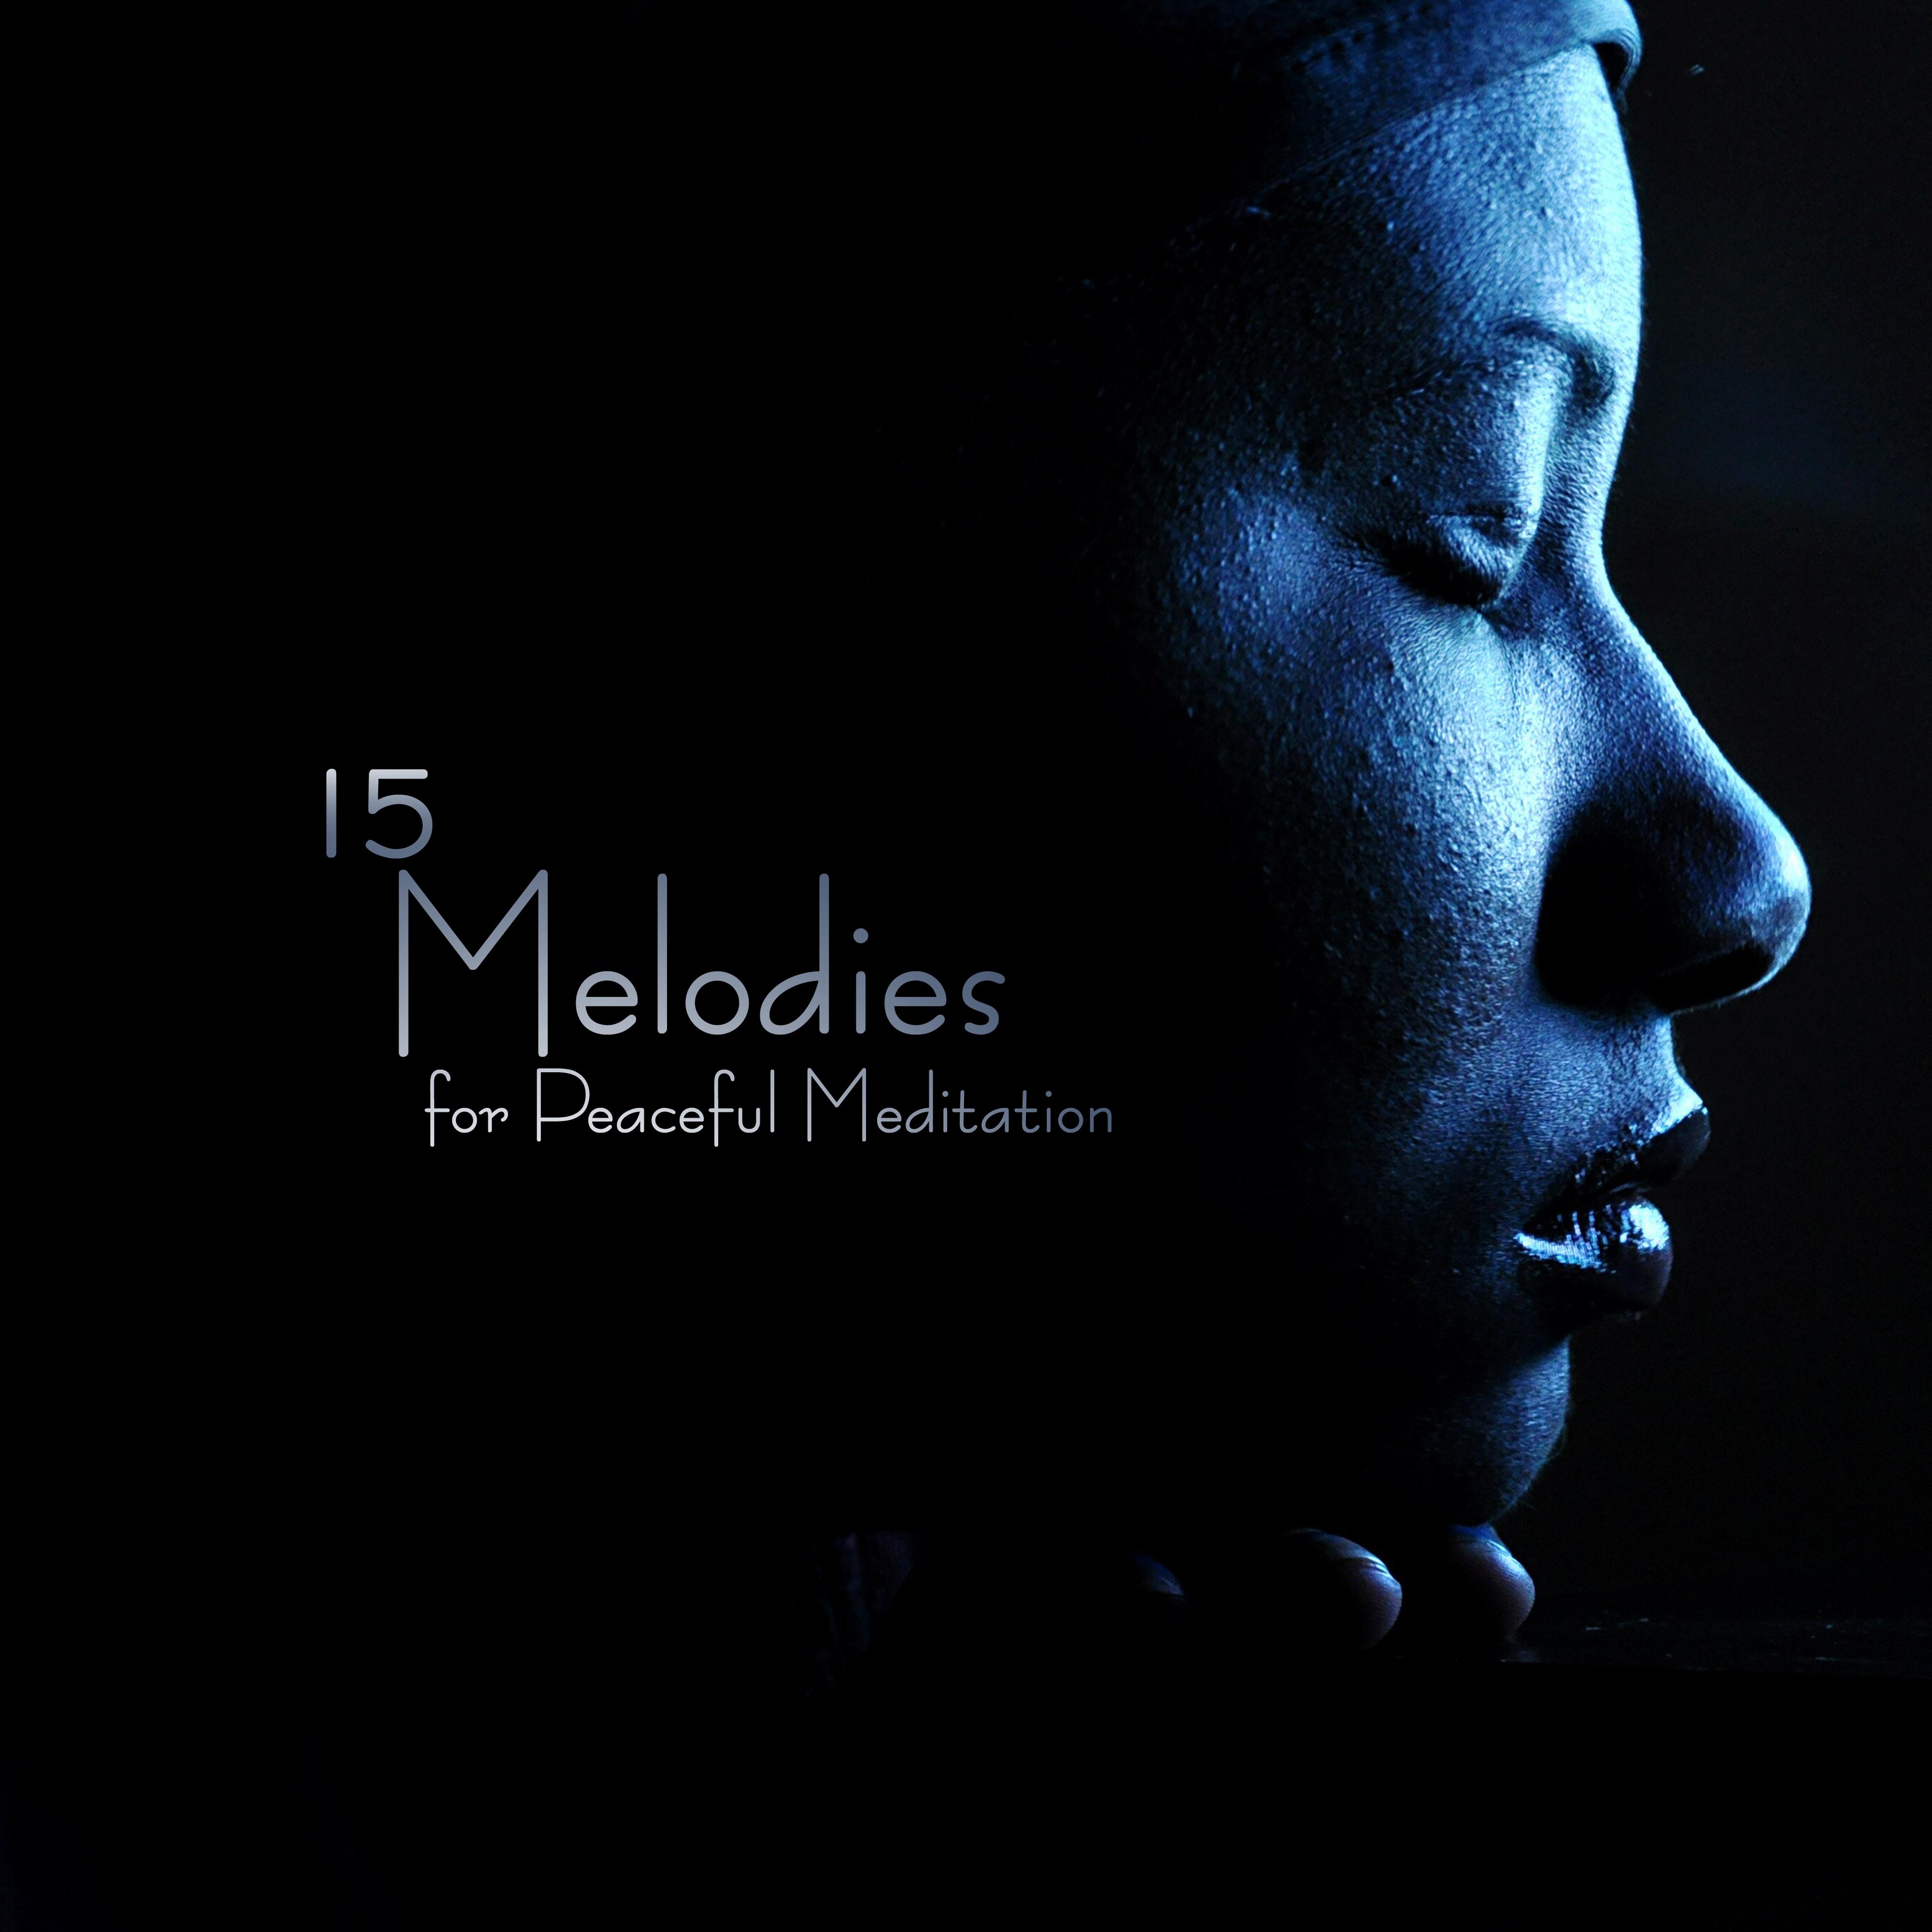 15 Melodies for Peaceful Meditation